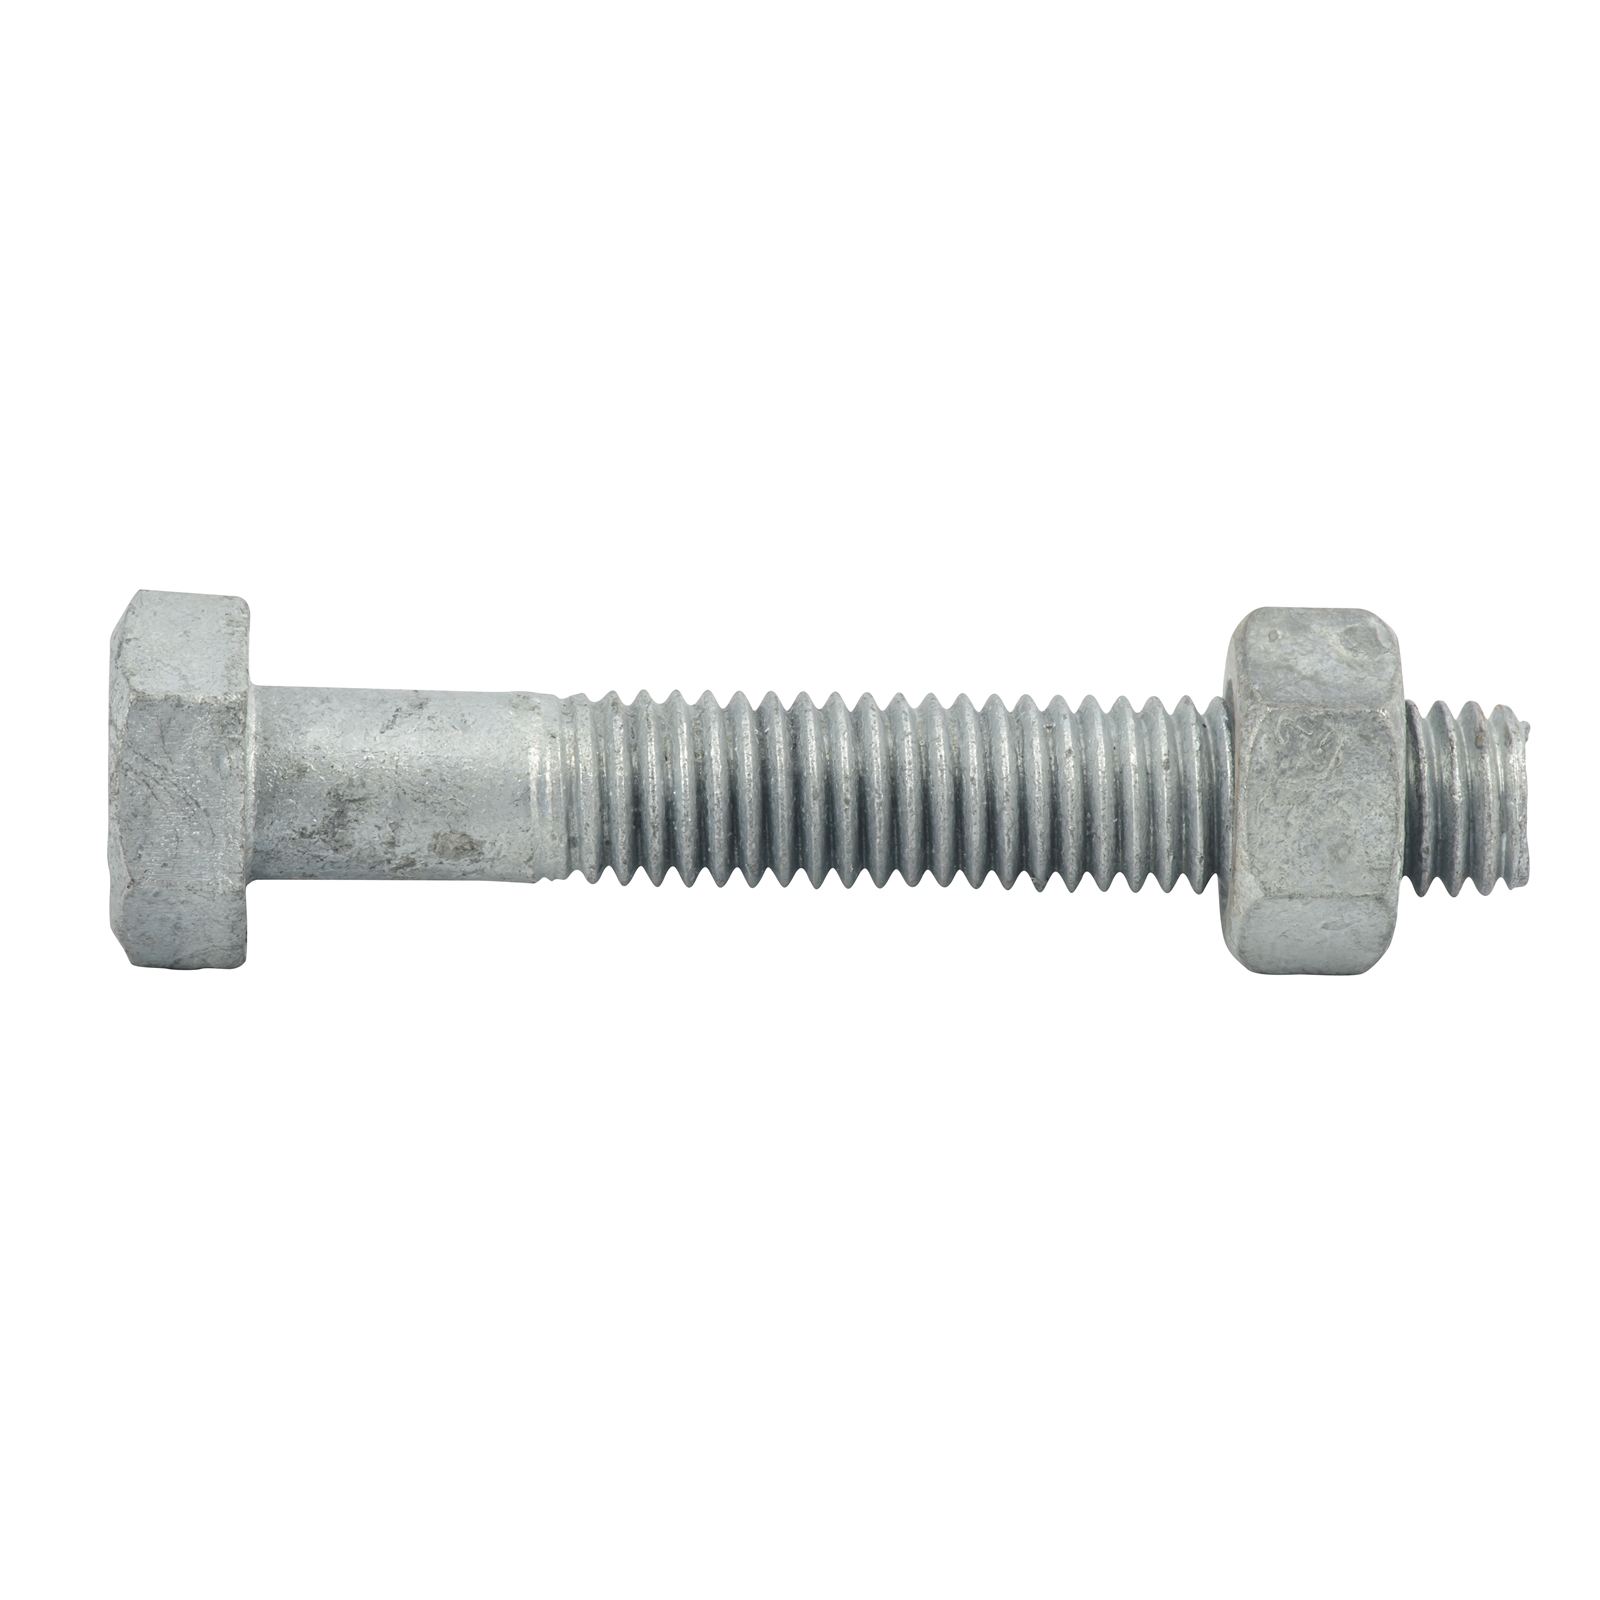 Zenith M8 x 50mm Galvanised Hex Head Bolt and Nut